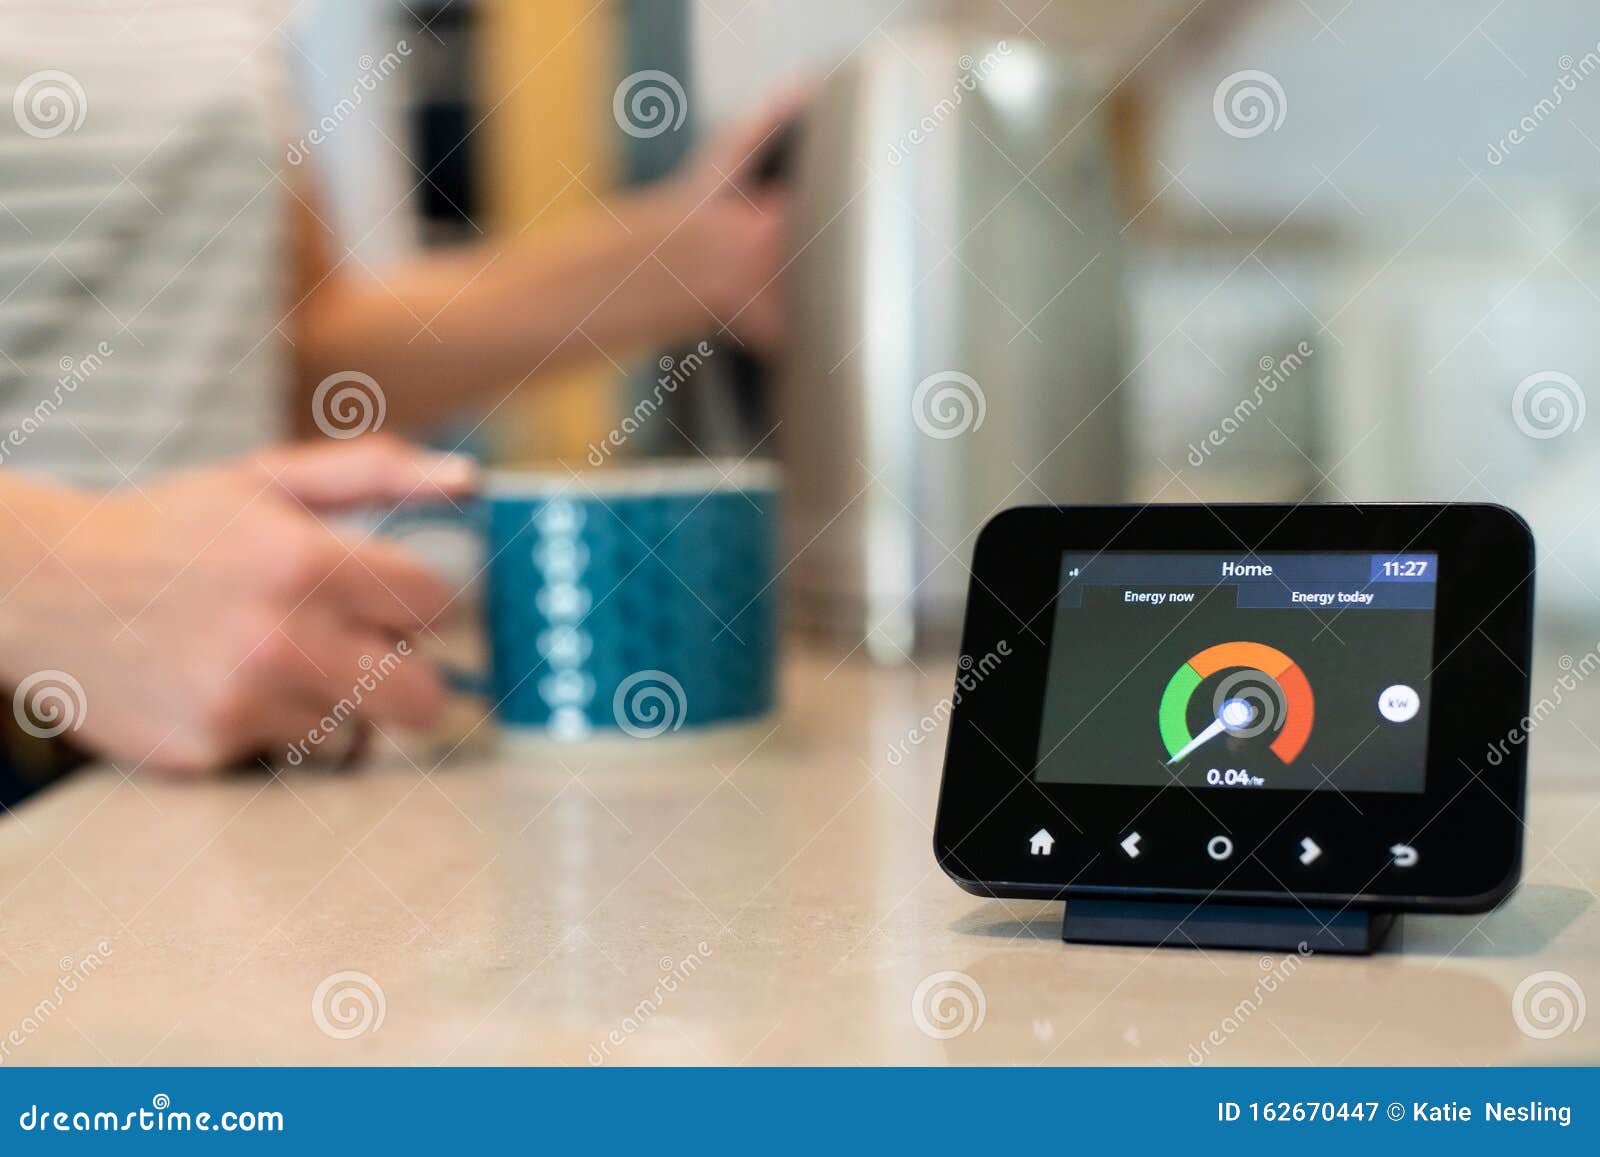 woman at home boiling kettle for hot drink with smart energy meter in foreground